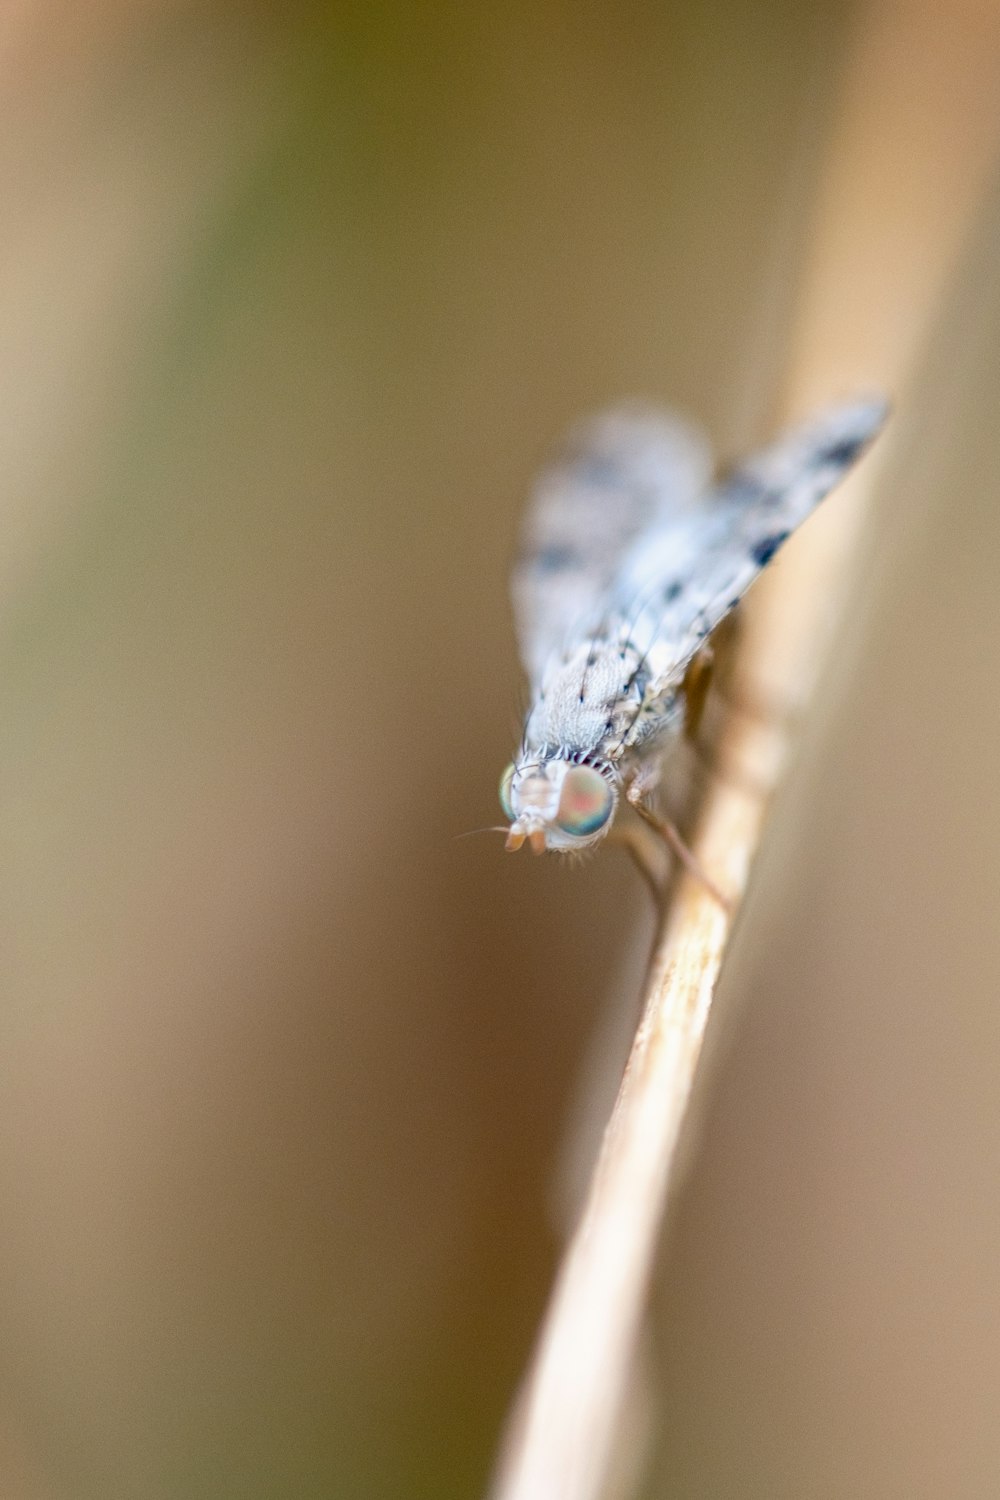 a small blue insect sitting on top of a plant